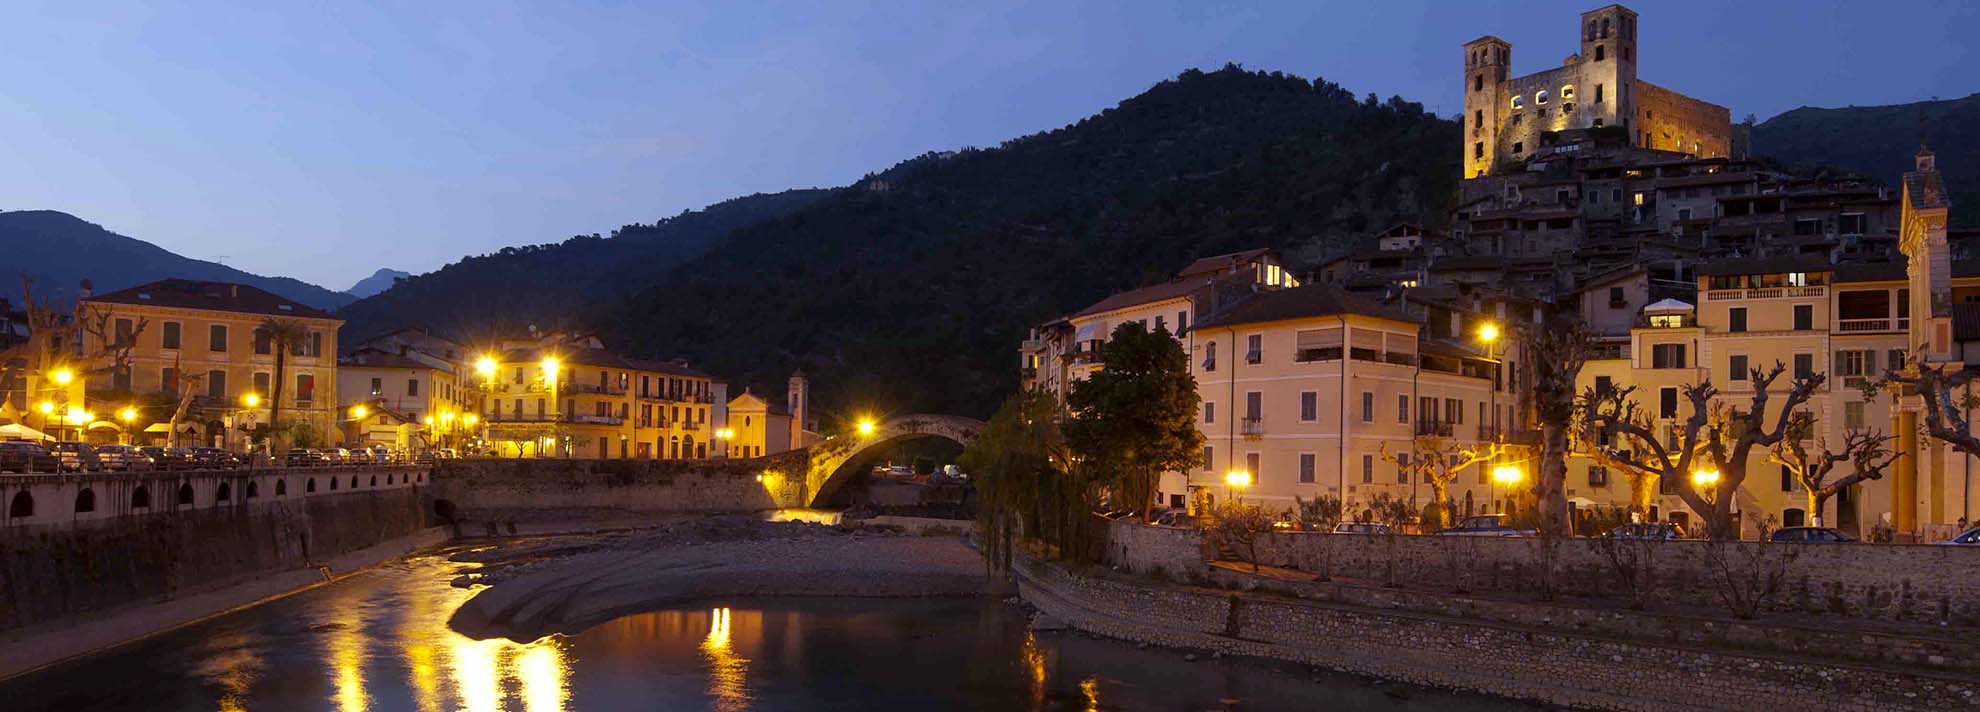 Promise of love in Dolceacqua. An enchanted place to experience love.